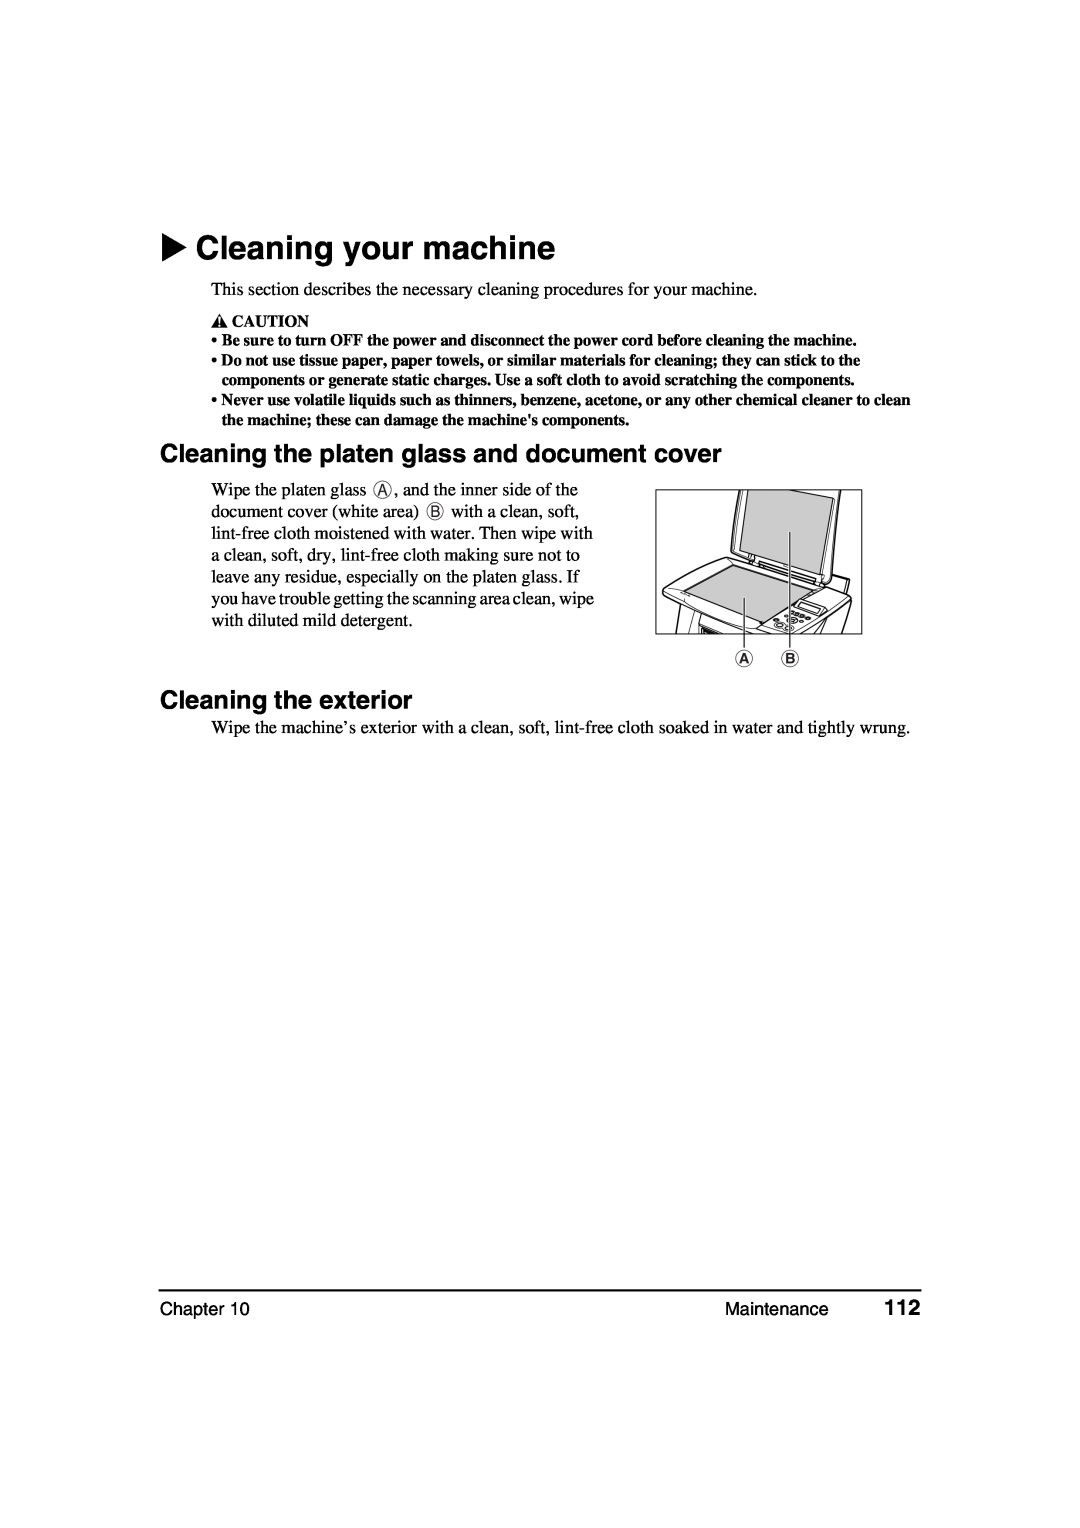 Canon MP360, MP370 manual Cleaning your machine, Cleaning the platen glass and document cover, Cleaning the exterior 